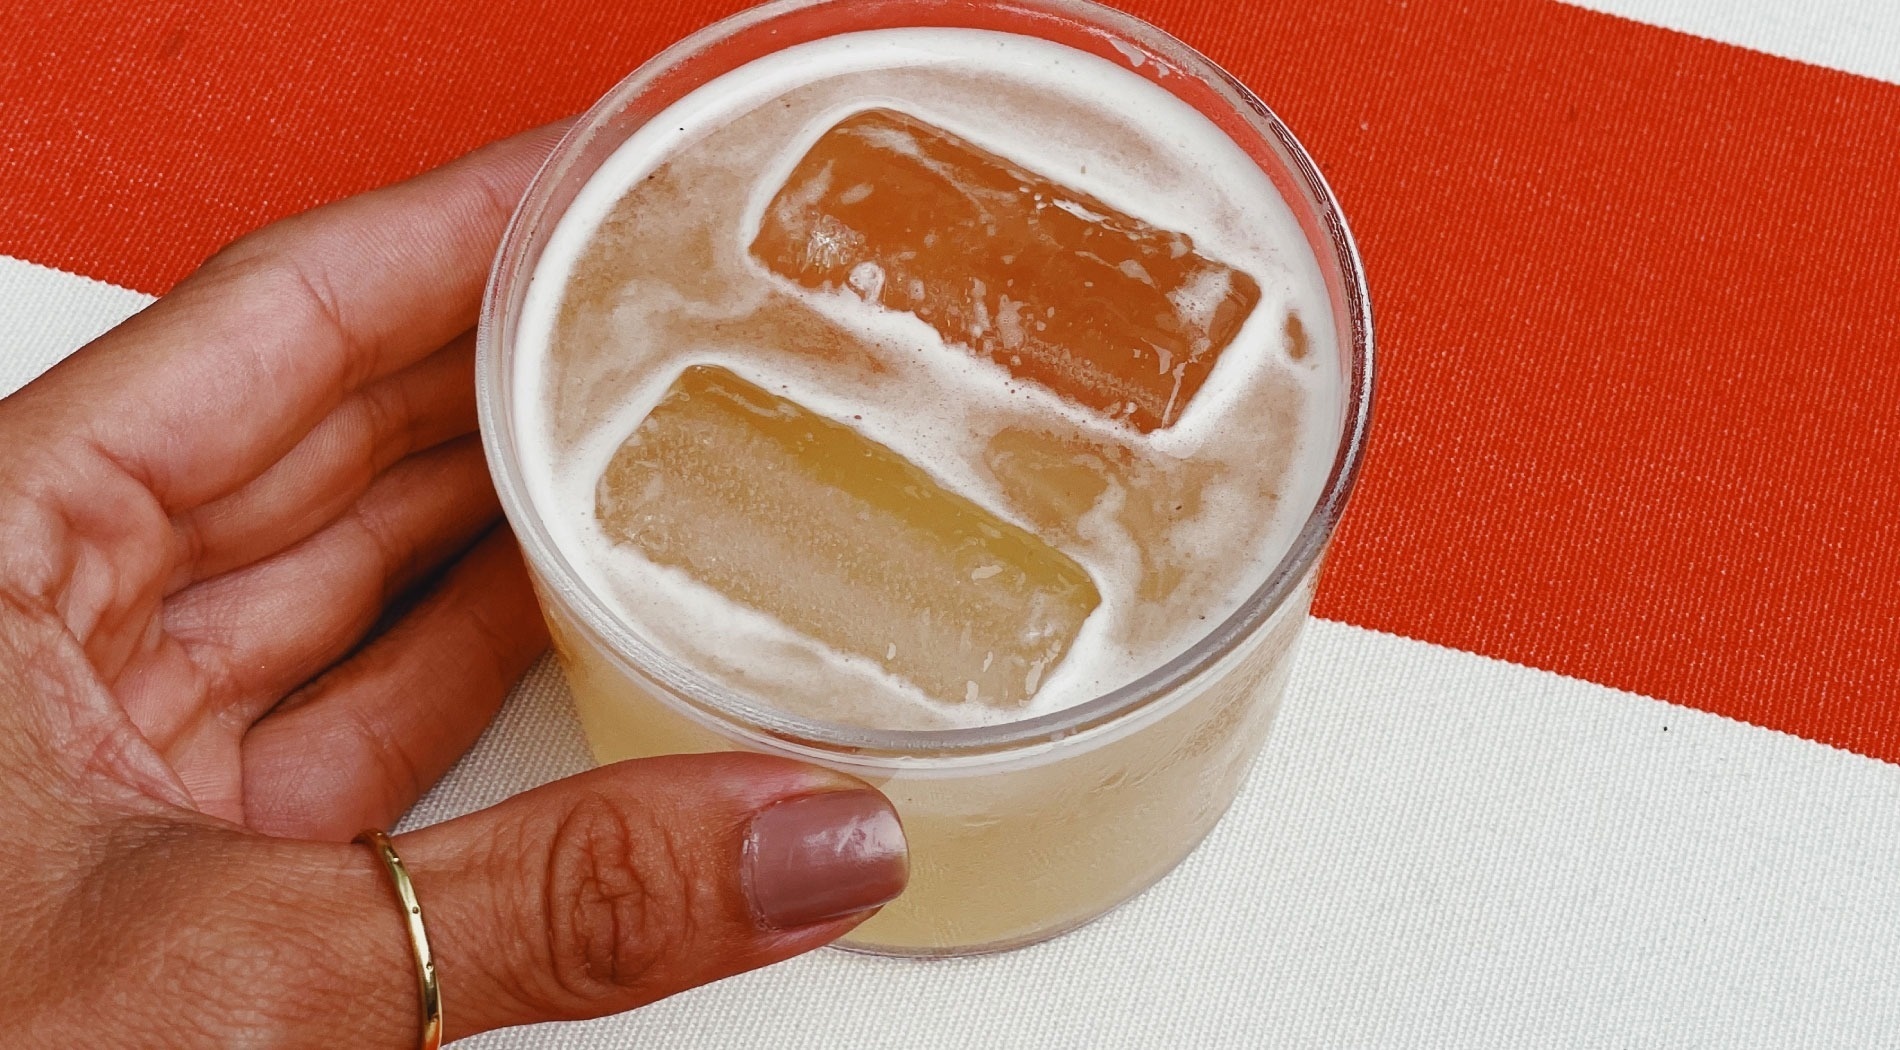 a hand is holding a glass with ice cubes in it